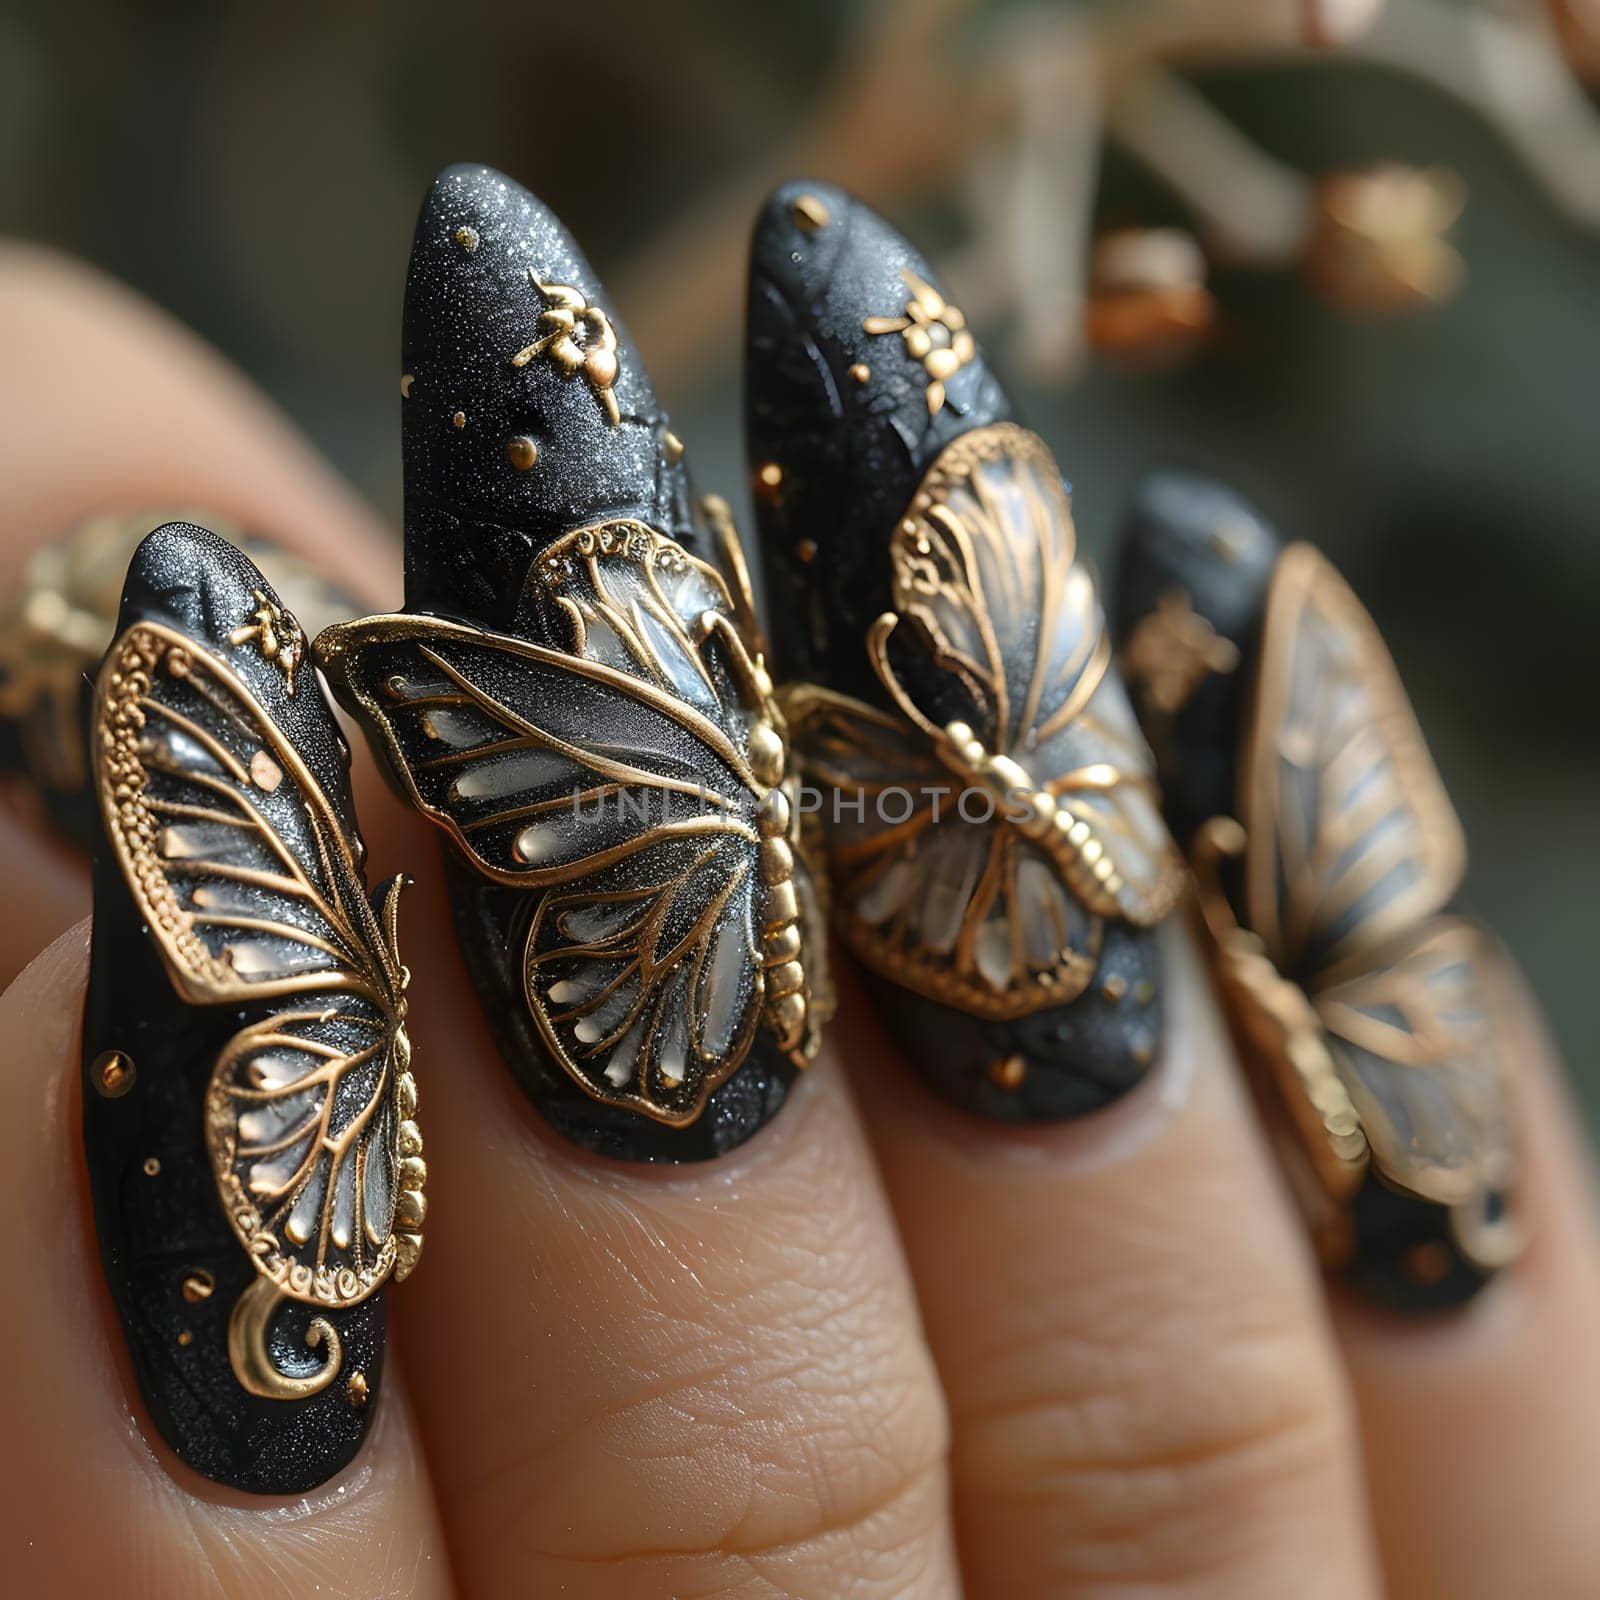 The womans fingers are adorned with intricate black and gold butterfly nail art, resembling tiny pieces of jewellery made from metal, creating a stunning fashion accessory